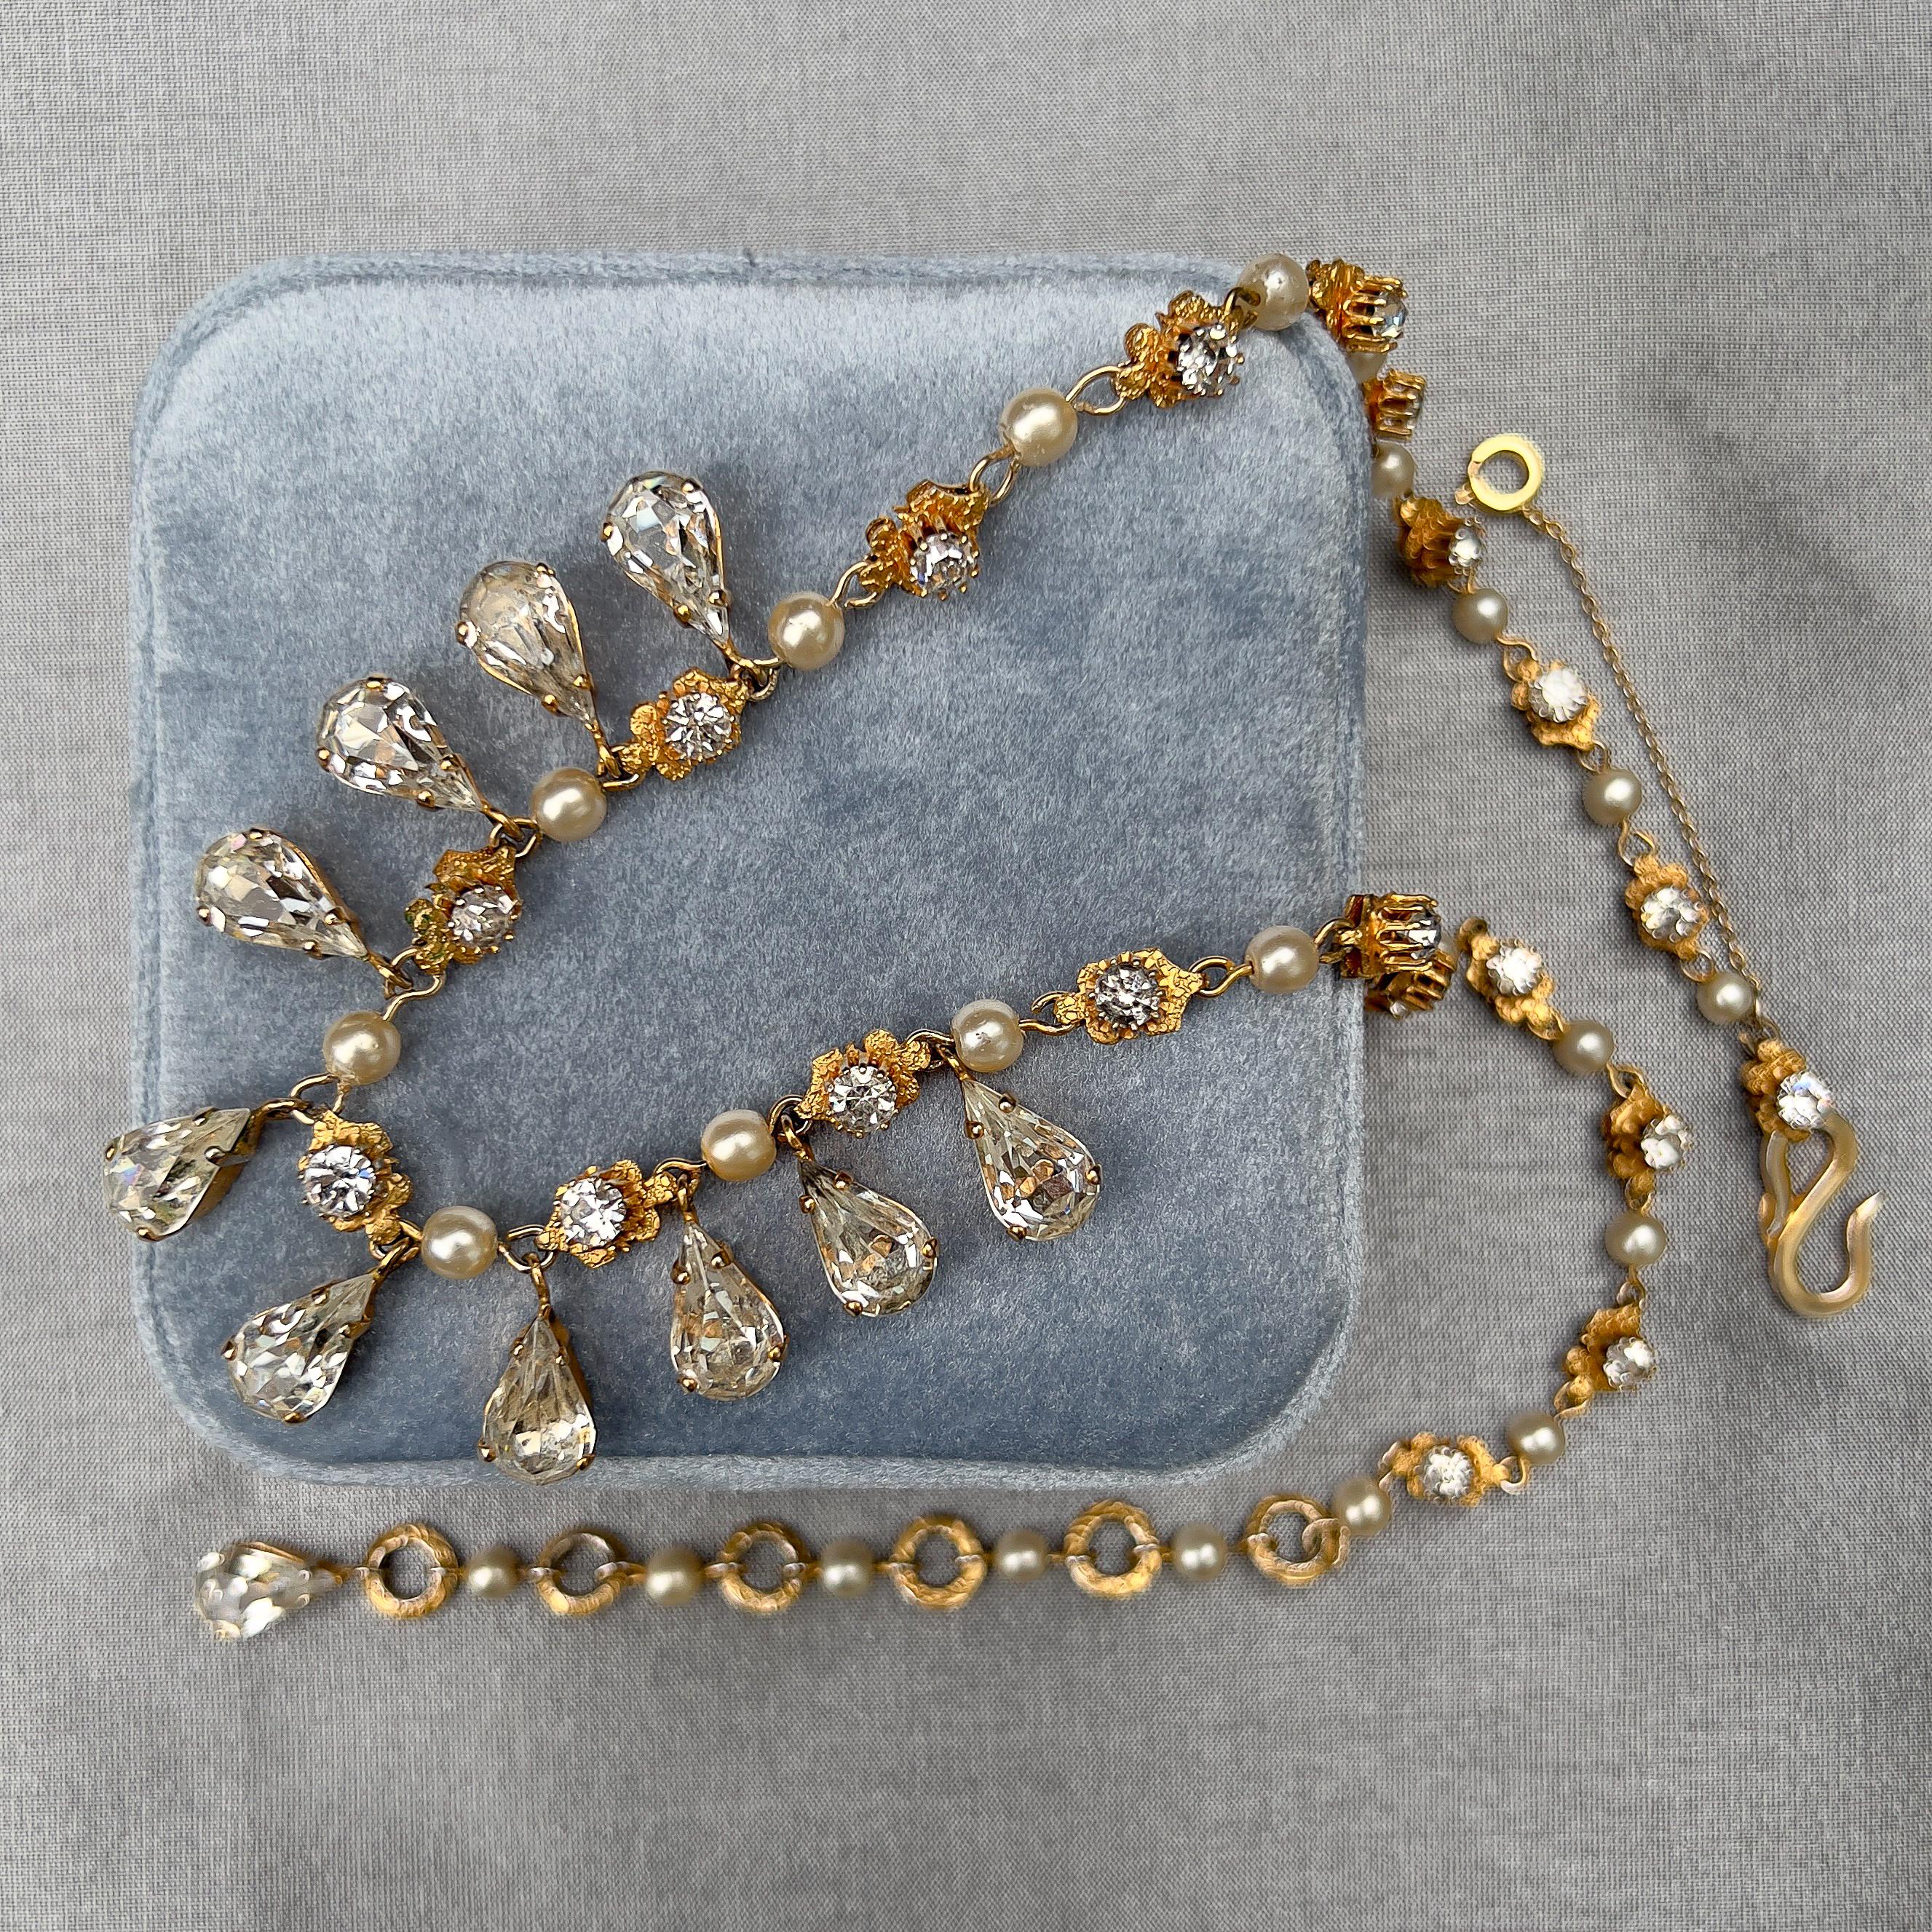 Christian Dior by Mitchel Maer 1952-1956 Vintage Rhinestone and Pearl Necklace In Good Condition For Sale In Skelmersdale, GB